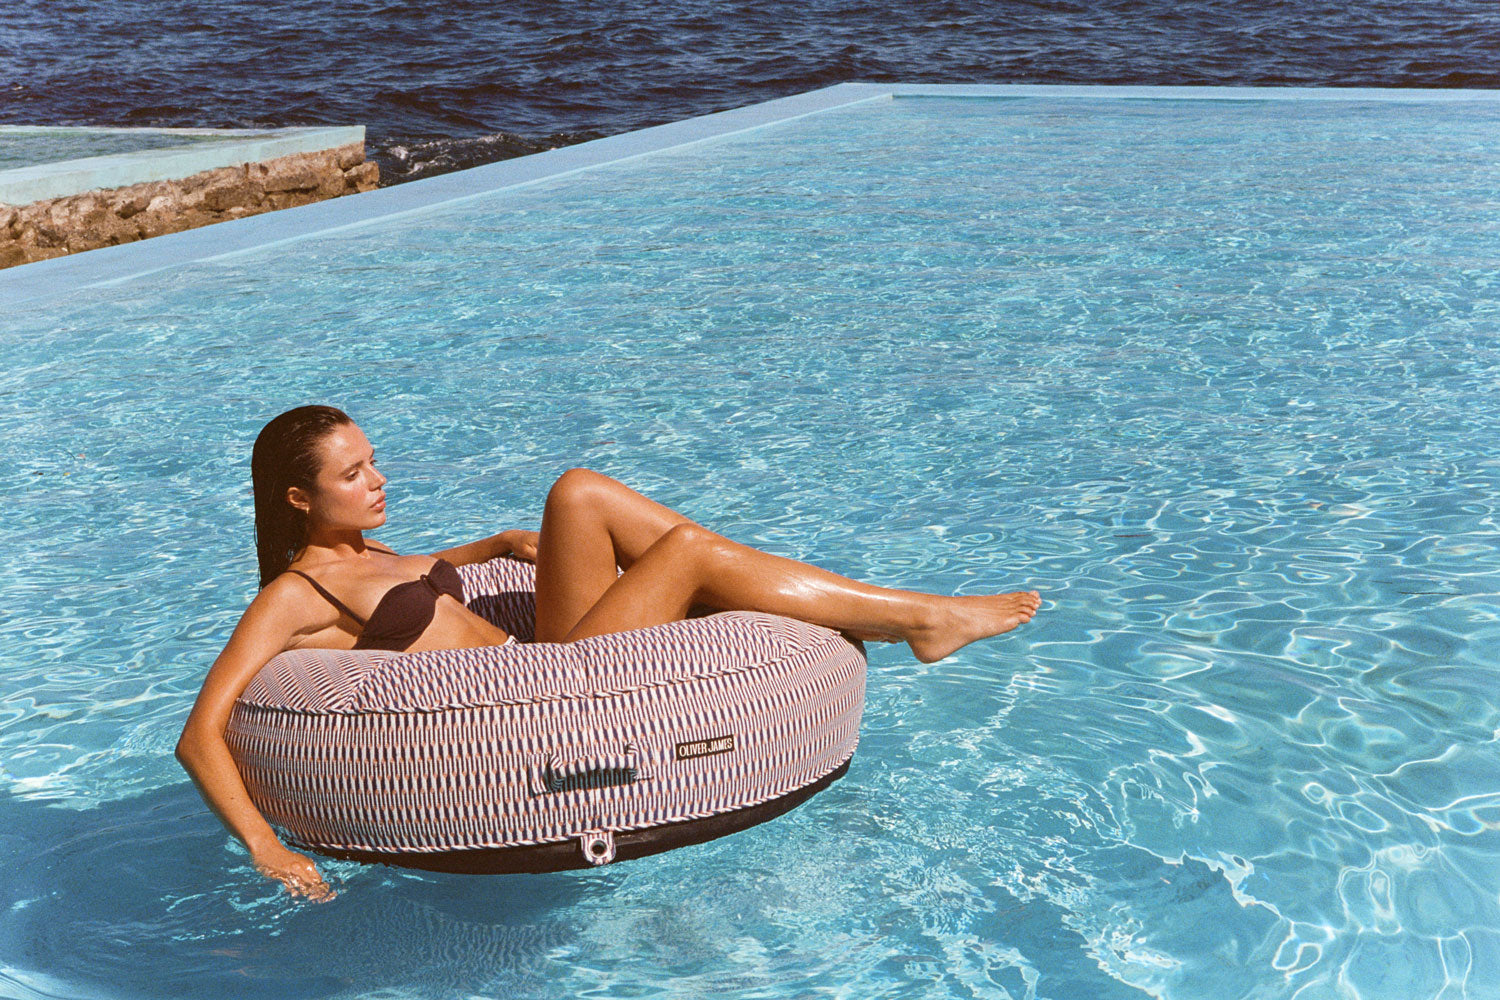 A woman sitting on a red and white luxury pool float in a pool with the ocean in the background.